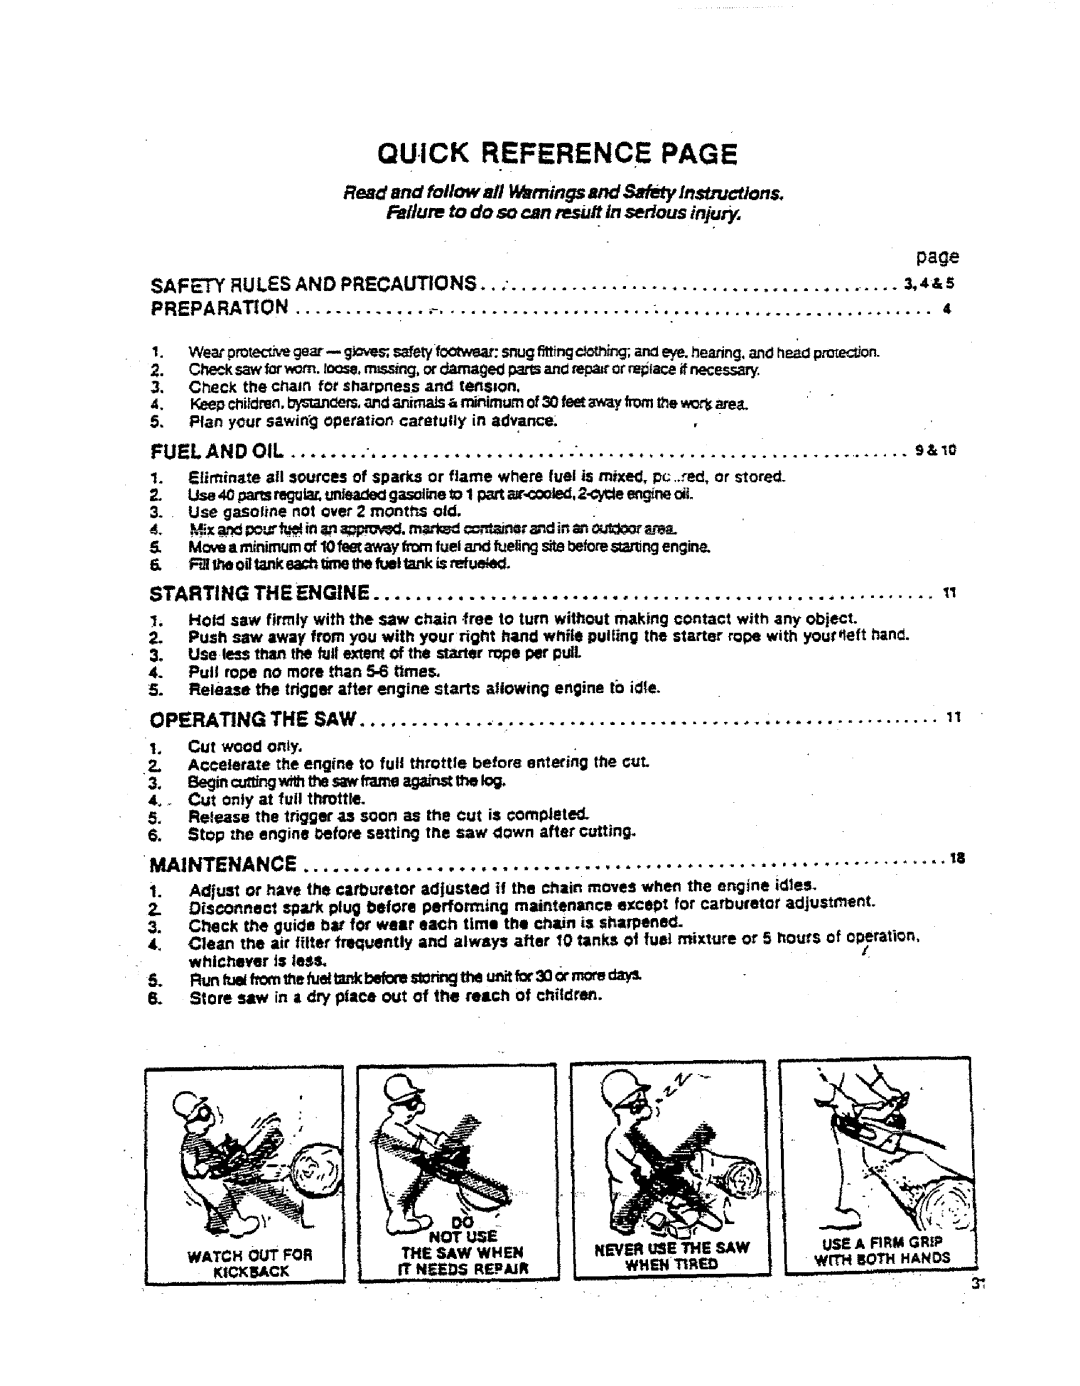 Sears 358.357231 manual Quick Reference Page, page, Fueland Oil, 9z, o, Starting Theengine, Operating The Saw, Maintenance 